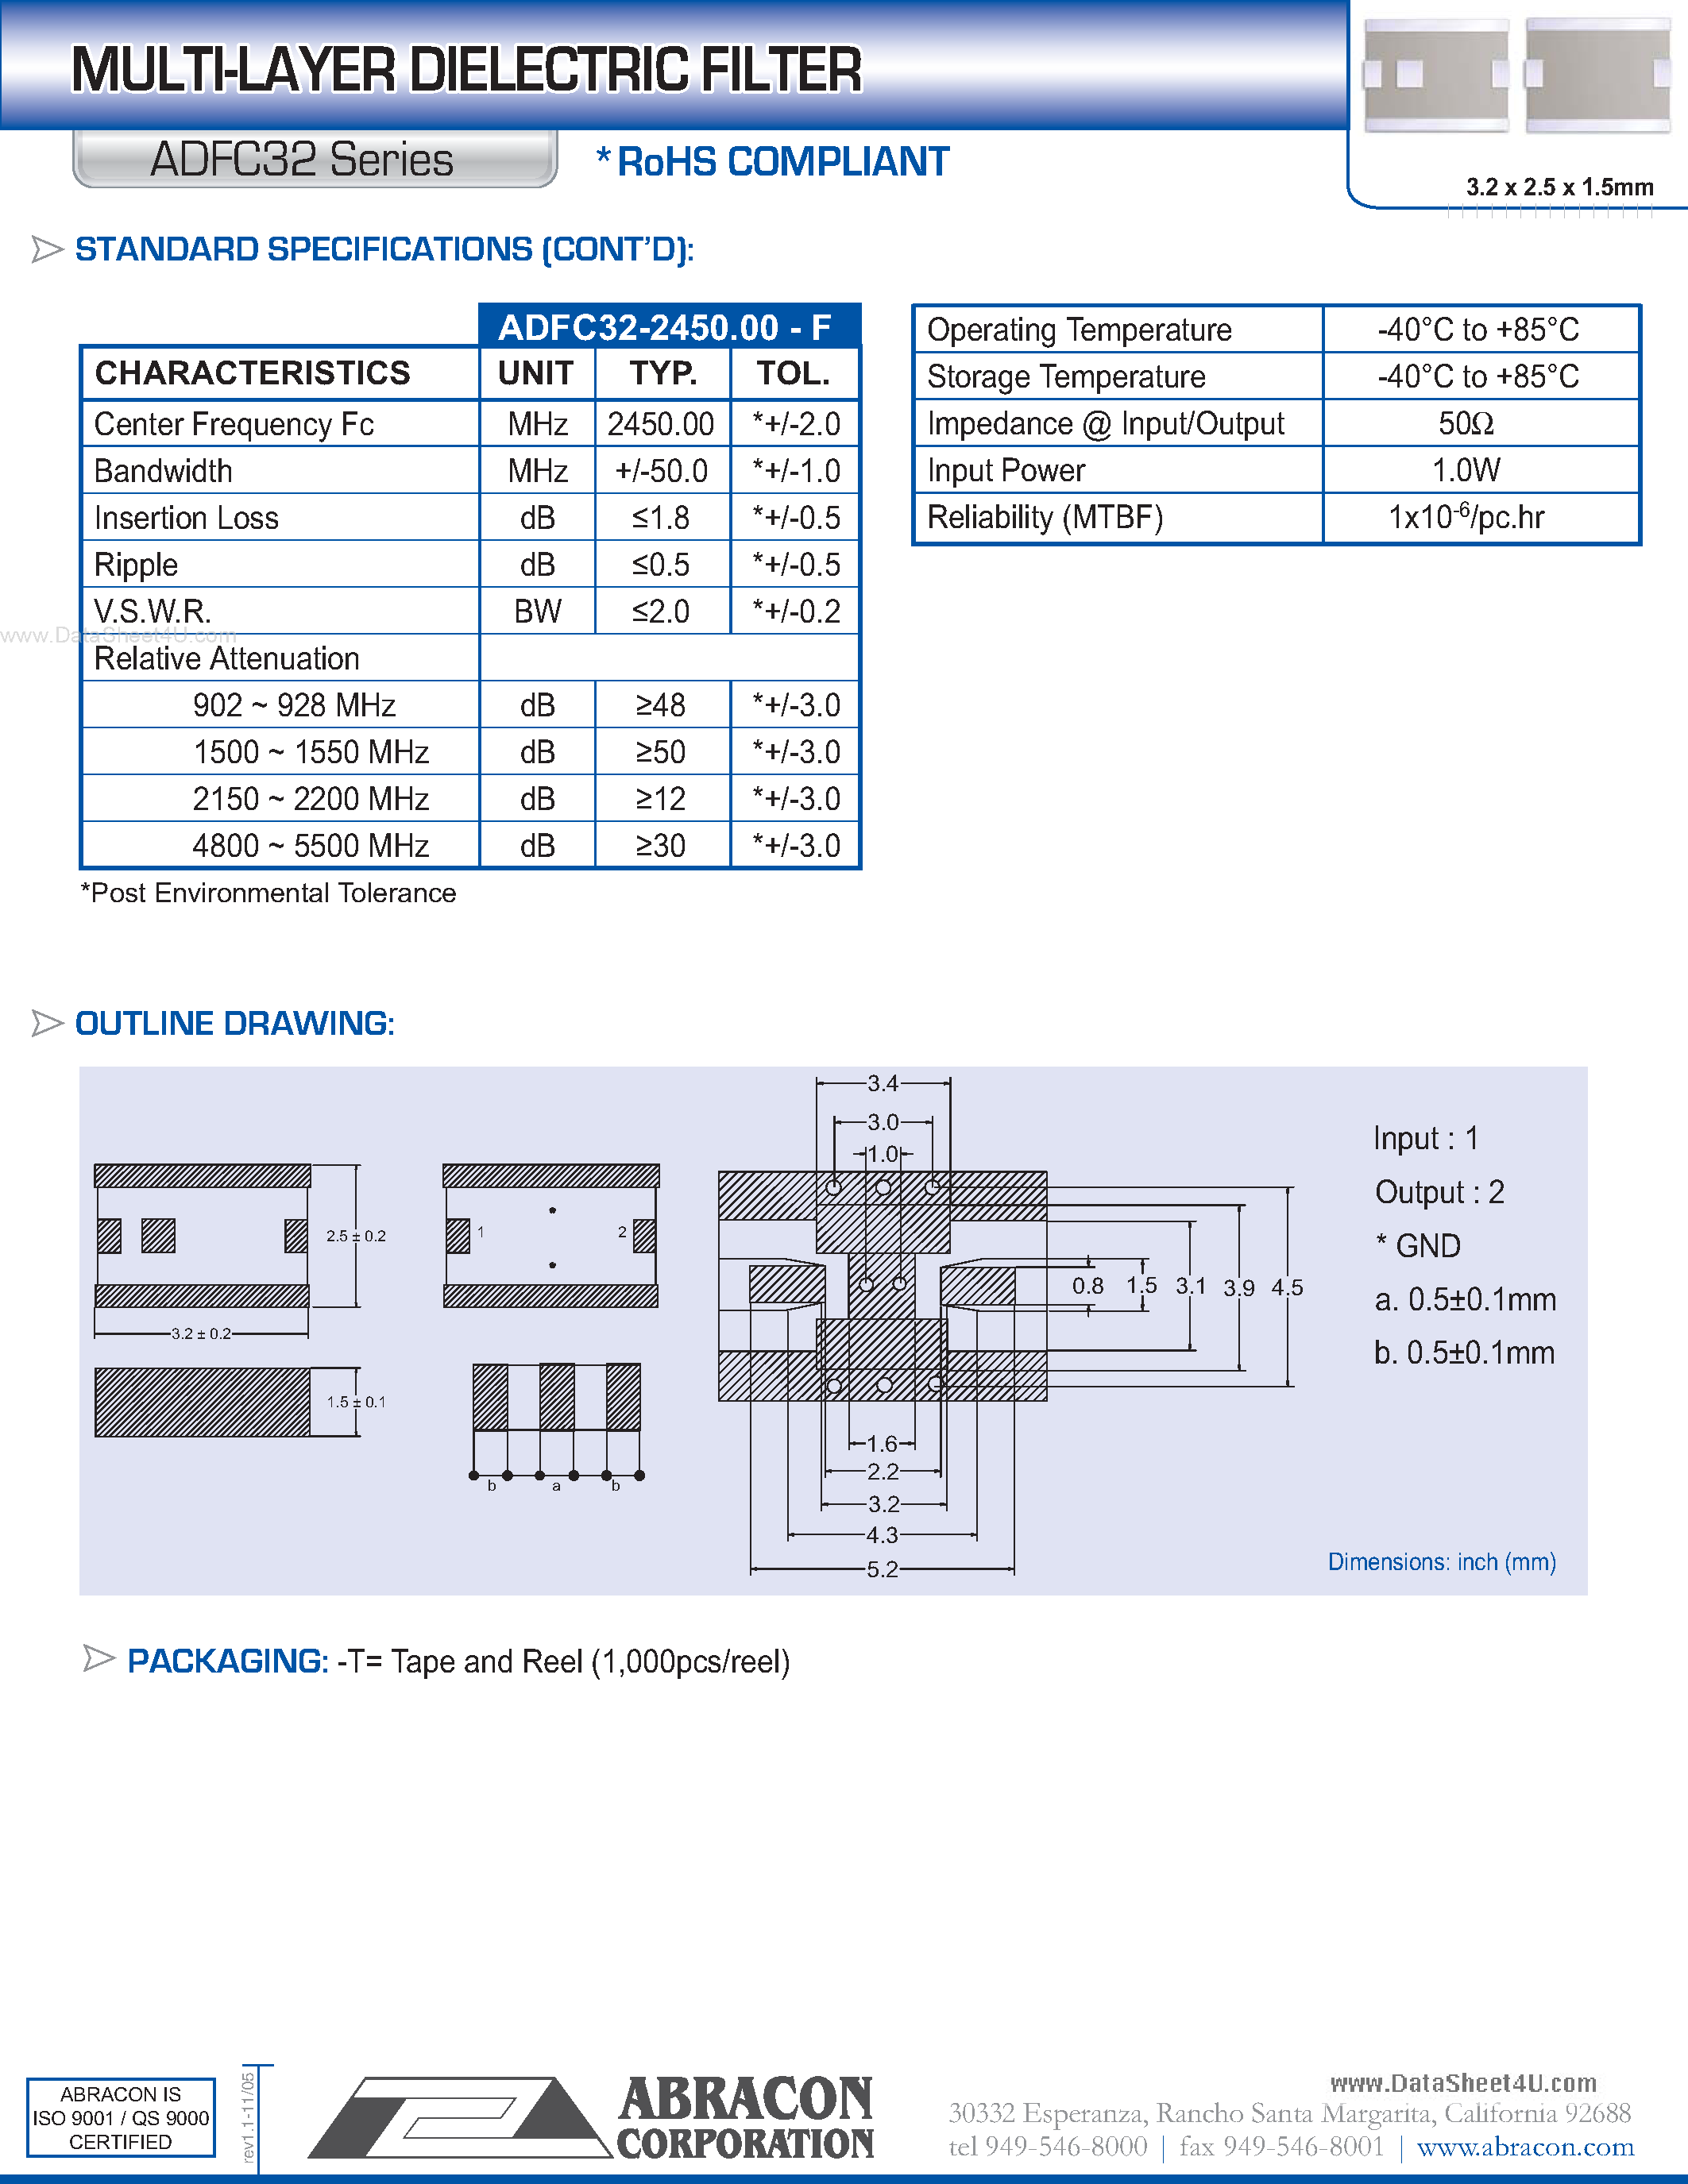 Datasheet ADFC32 - MULTI-LAYER DIELECTRIC FILTER page 2